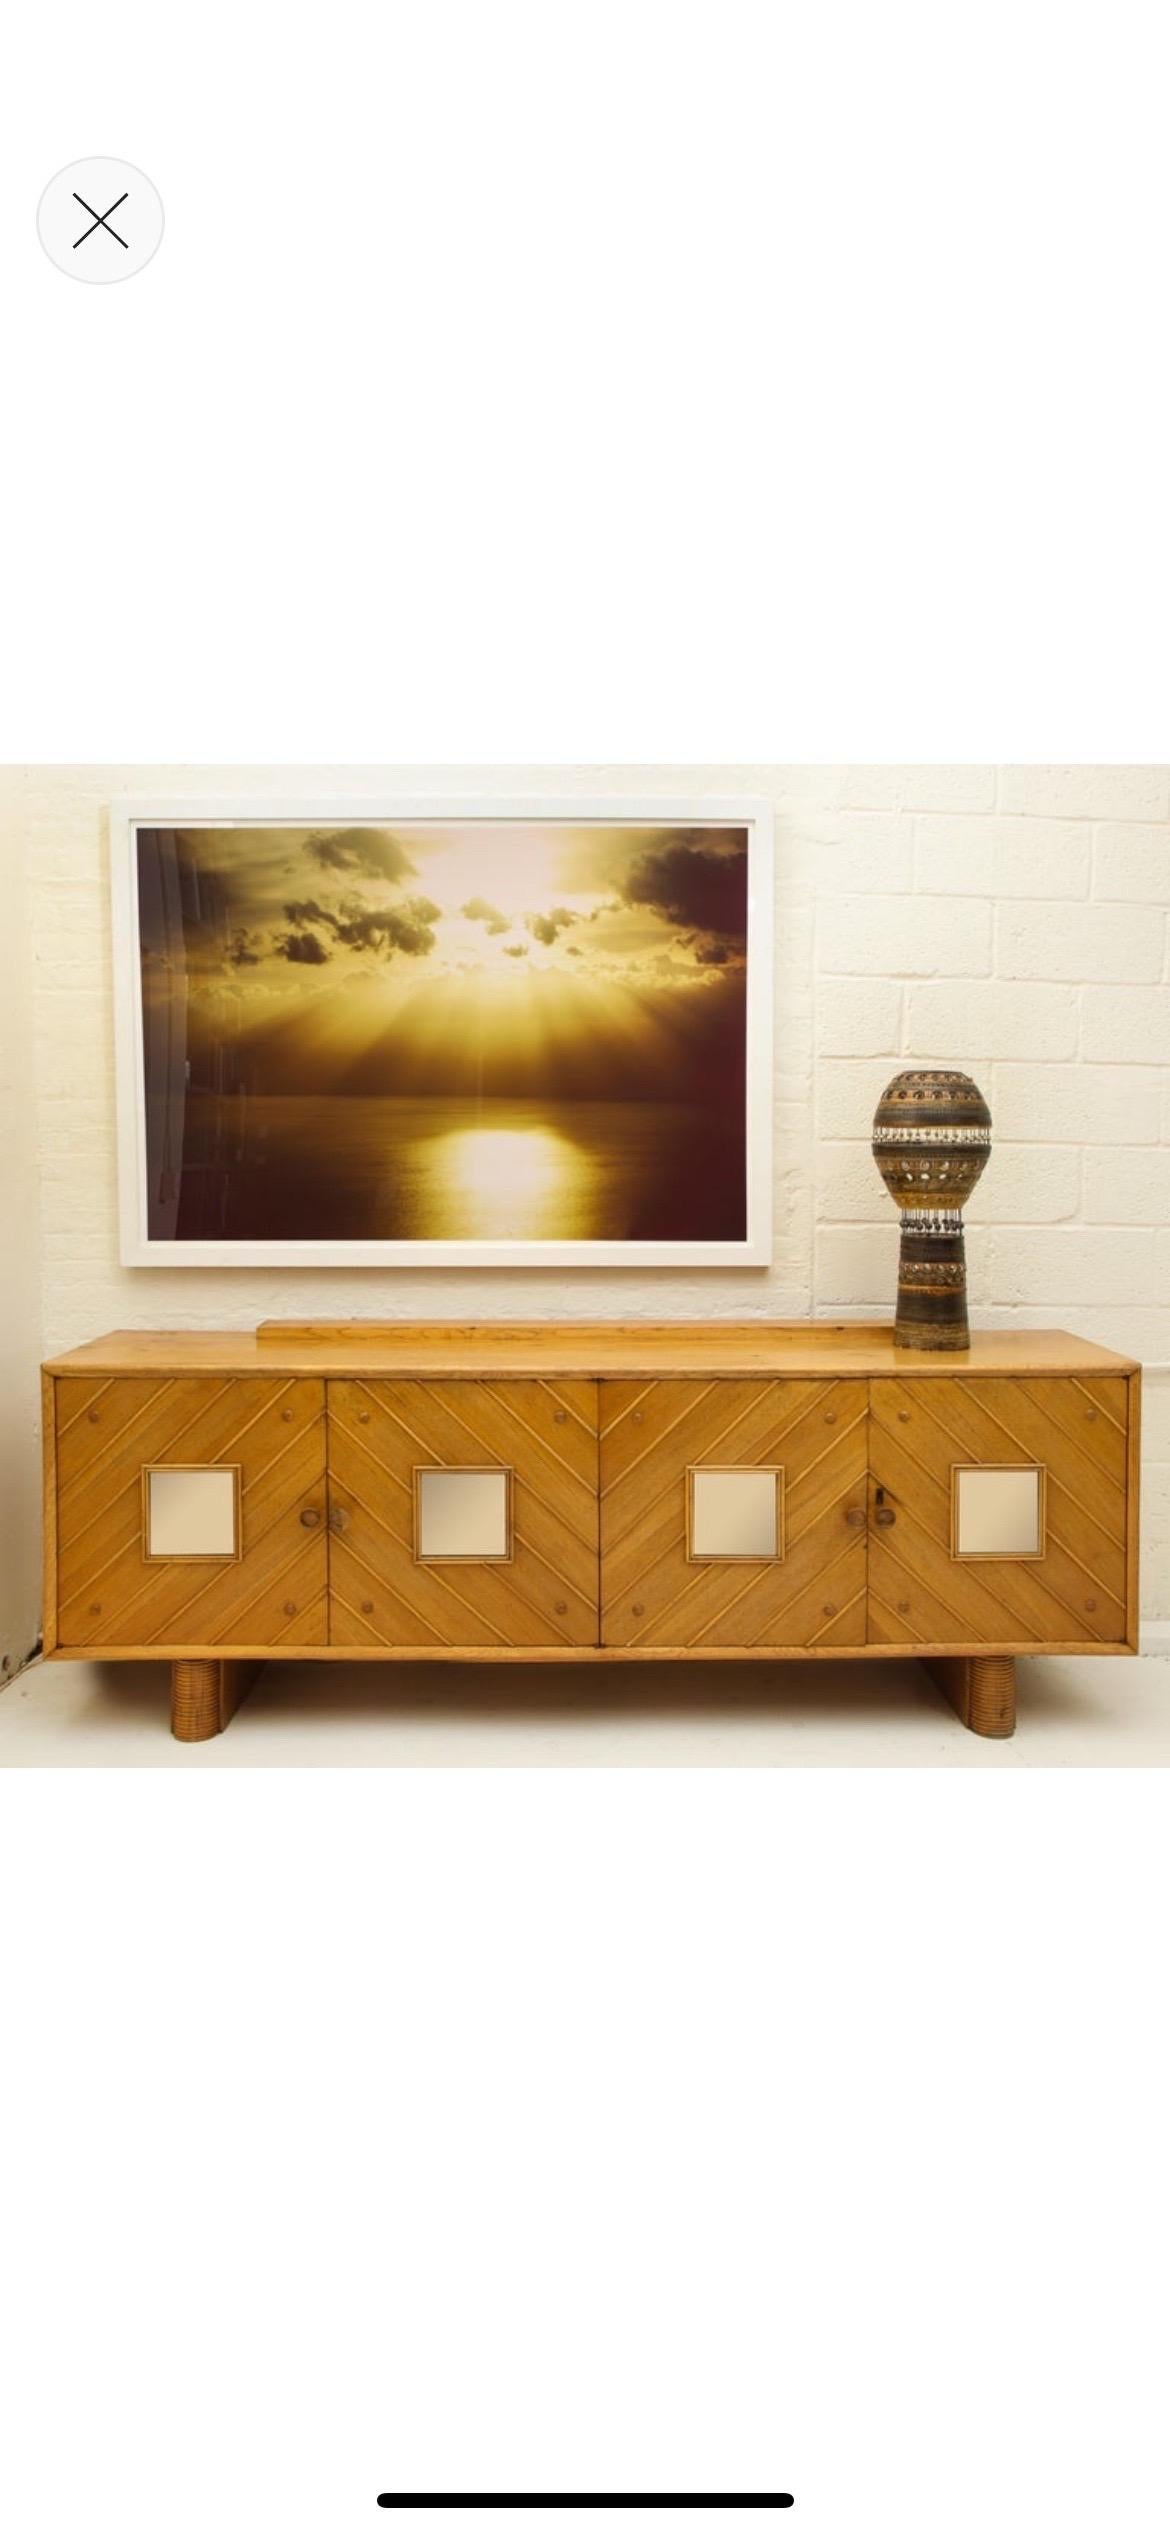 Pier luigi Colli oak sideboard, Mid-Century Modern, Italy, 1950s

Beautiful oak sideboard. The oak has lovely patina throughout the piece. 
It is a large-scale sideboard with four doors and architectural details throughout.
Amazing oak grain visible